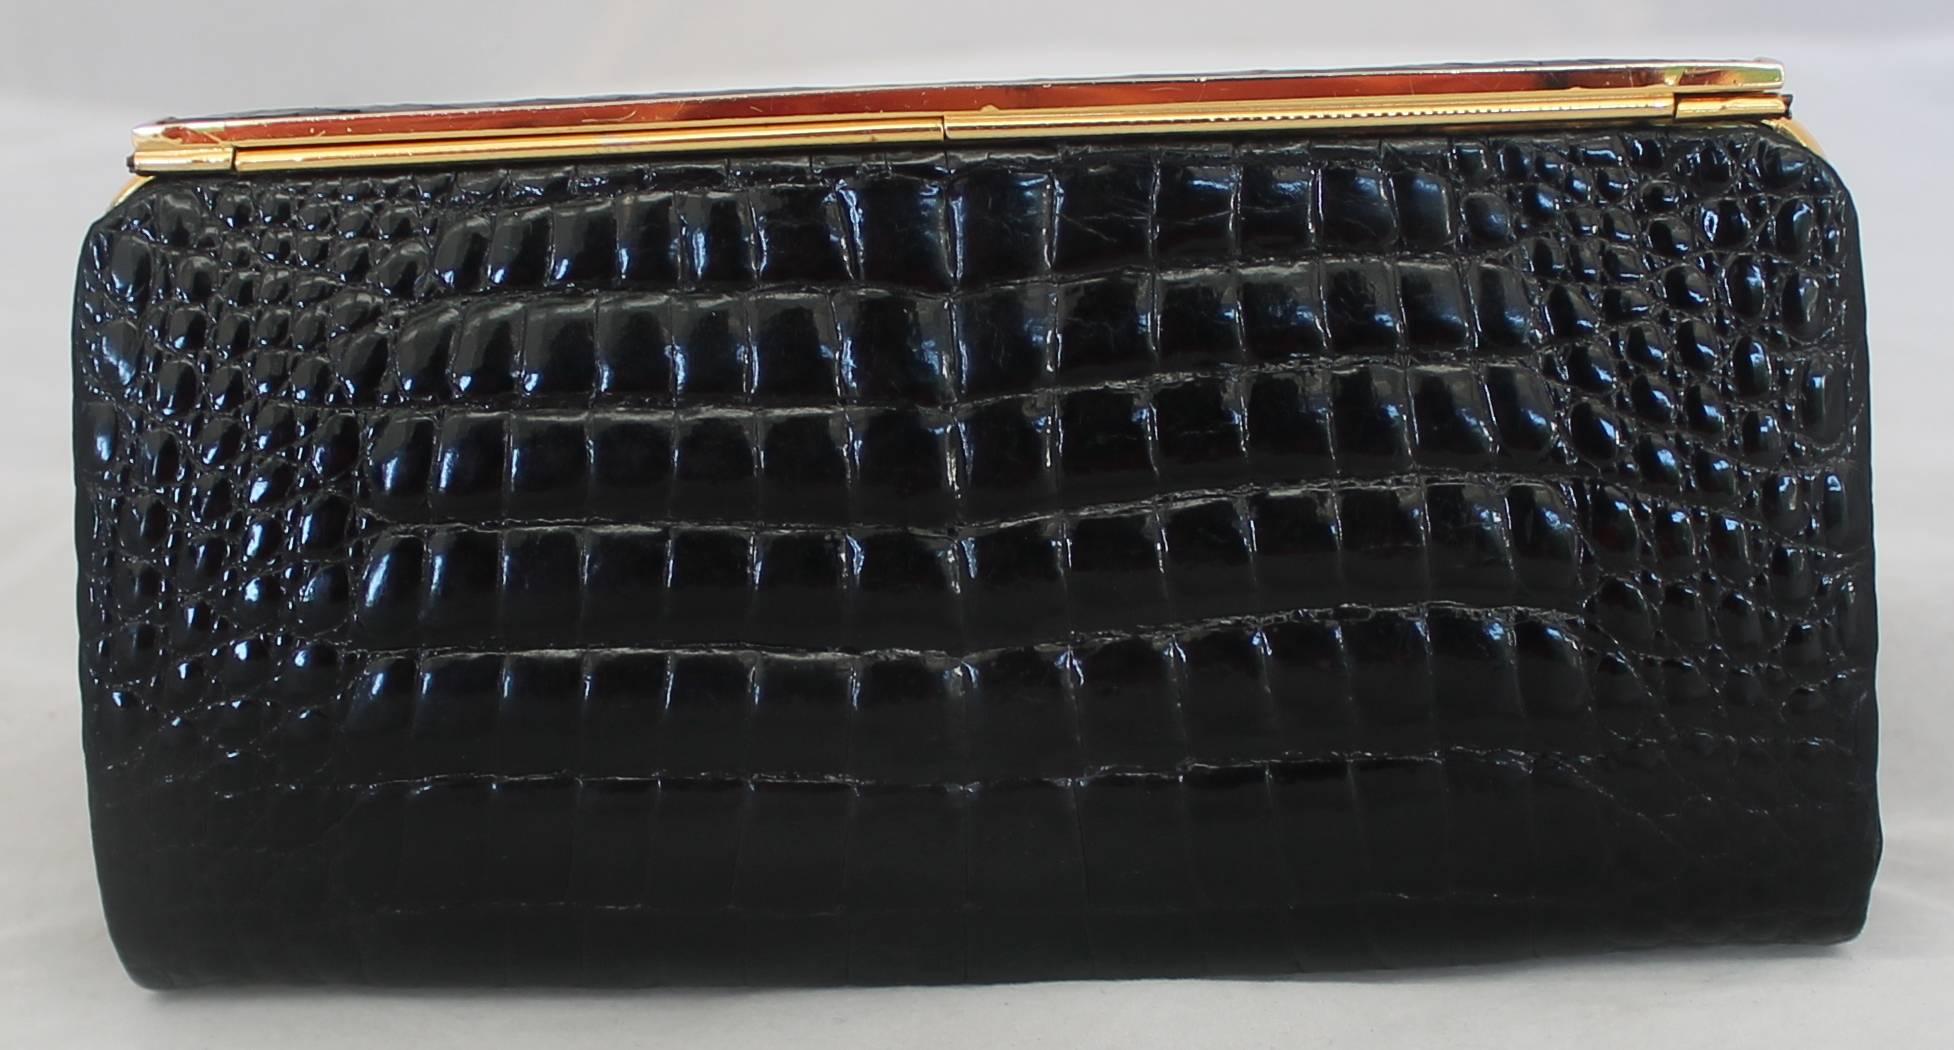 Gucci Vintage Black Small Alligator Clutch - GHW - Circa 1980's or Earlier.  This chic alligator clutch is in very good vintage condition with only some wear consistent with its age.  It features a sleek black alligator skin, gold hardware, a top